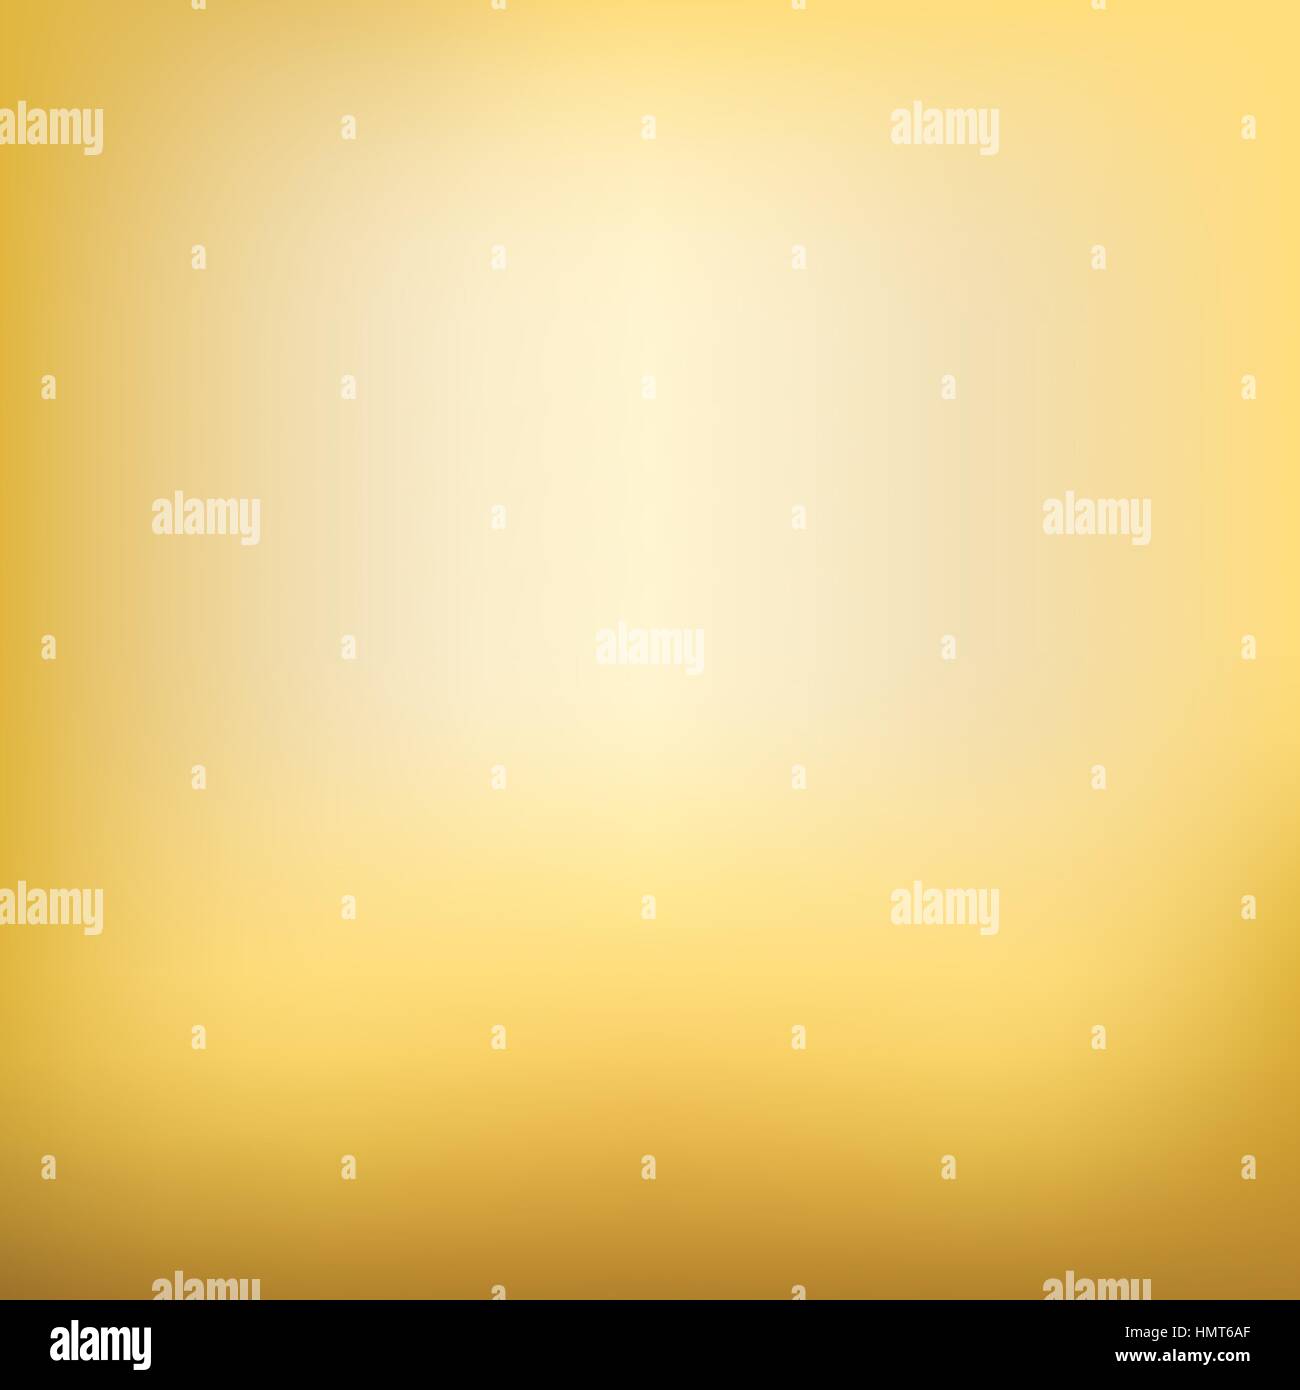 Gold gradient. Blurred golden colors mesh background. Smooth blend banner template. Easy editable soft colored eps8 vector illustration without transp Stock Vector